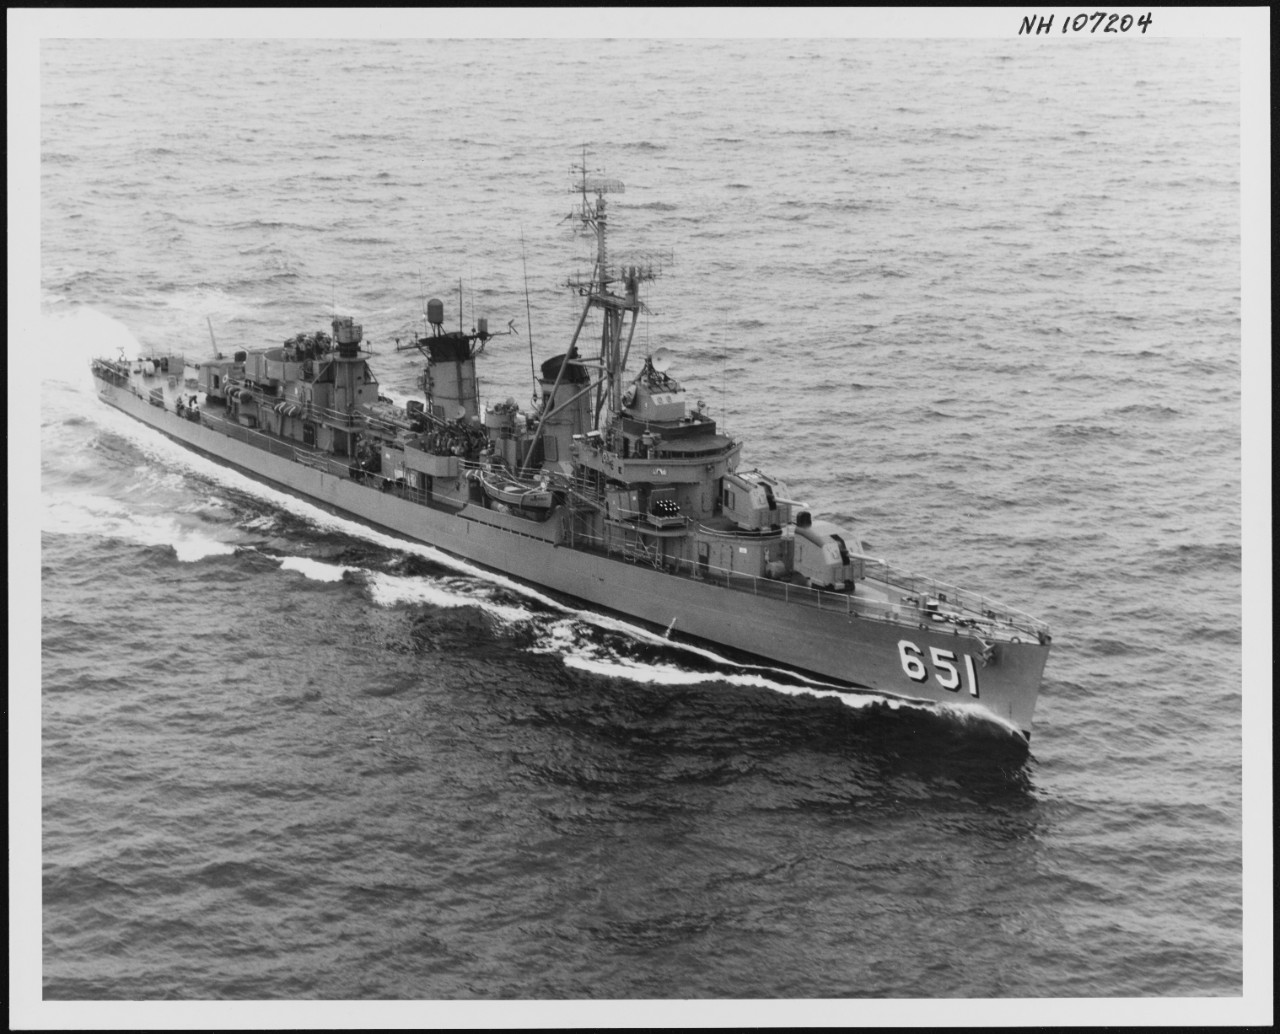 Photo #: NH 107204  USS Cogswell